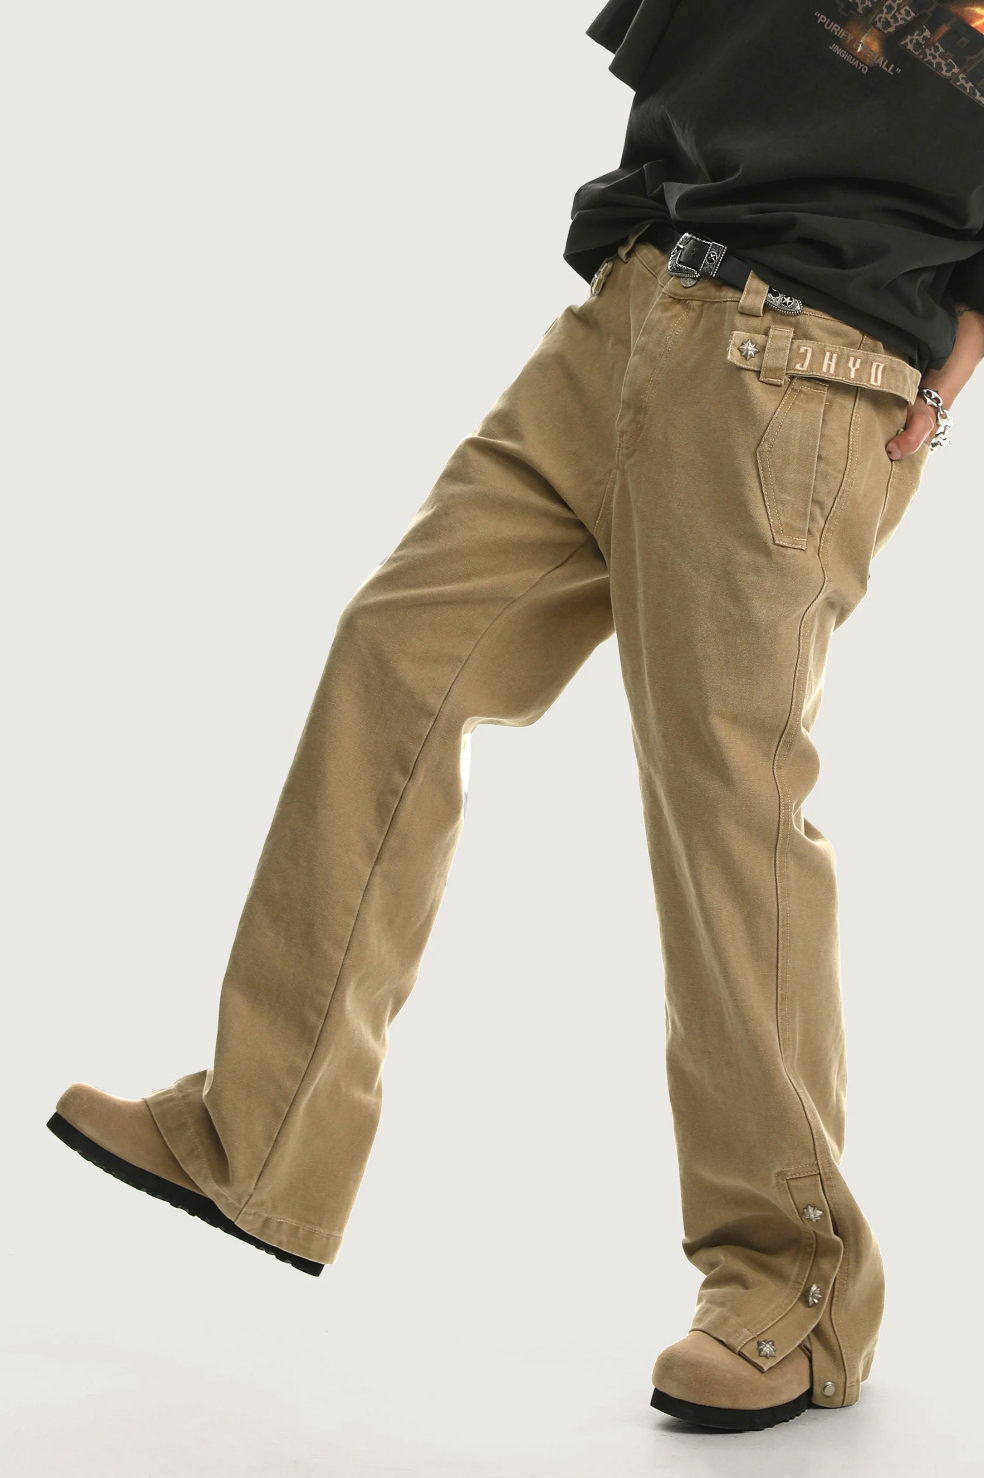 JHYQ Canvas Structured Buckle Work Pants